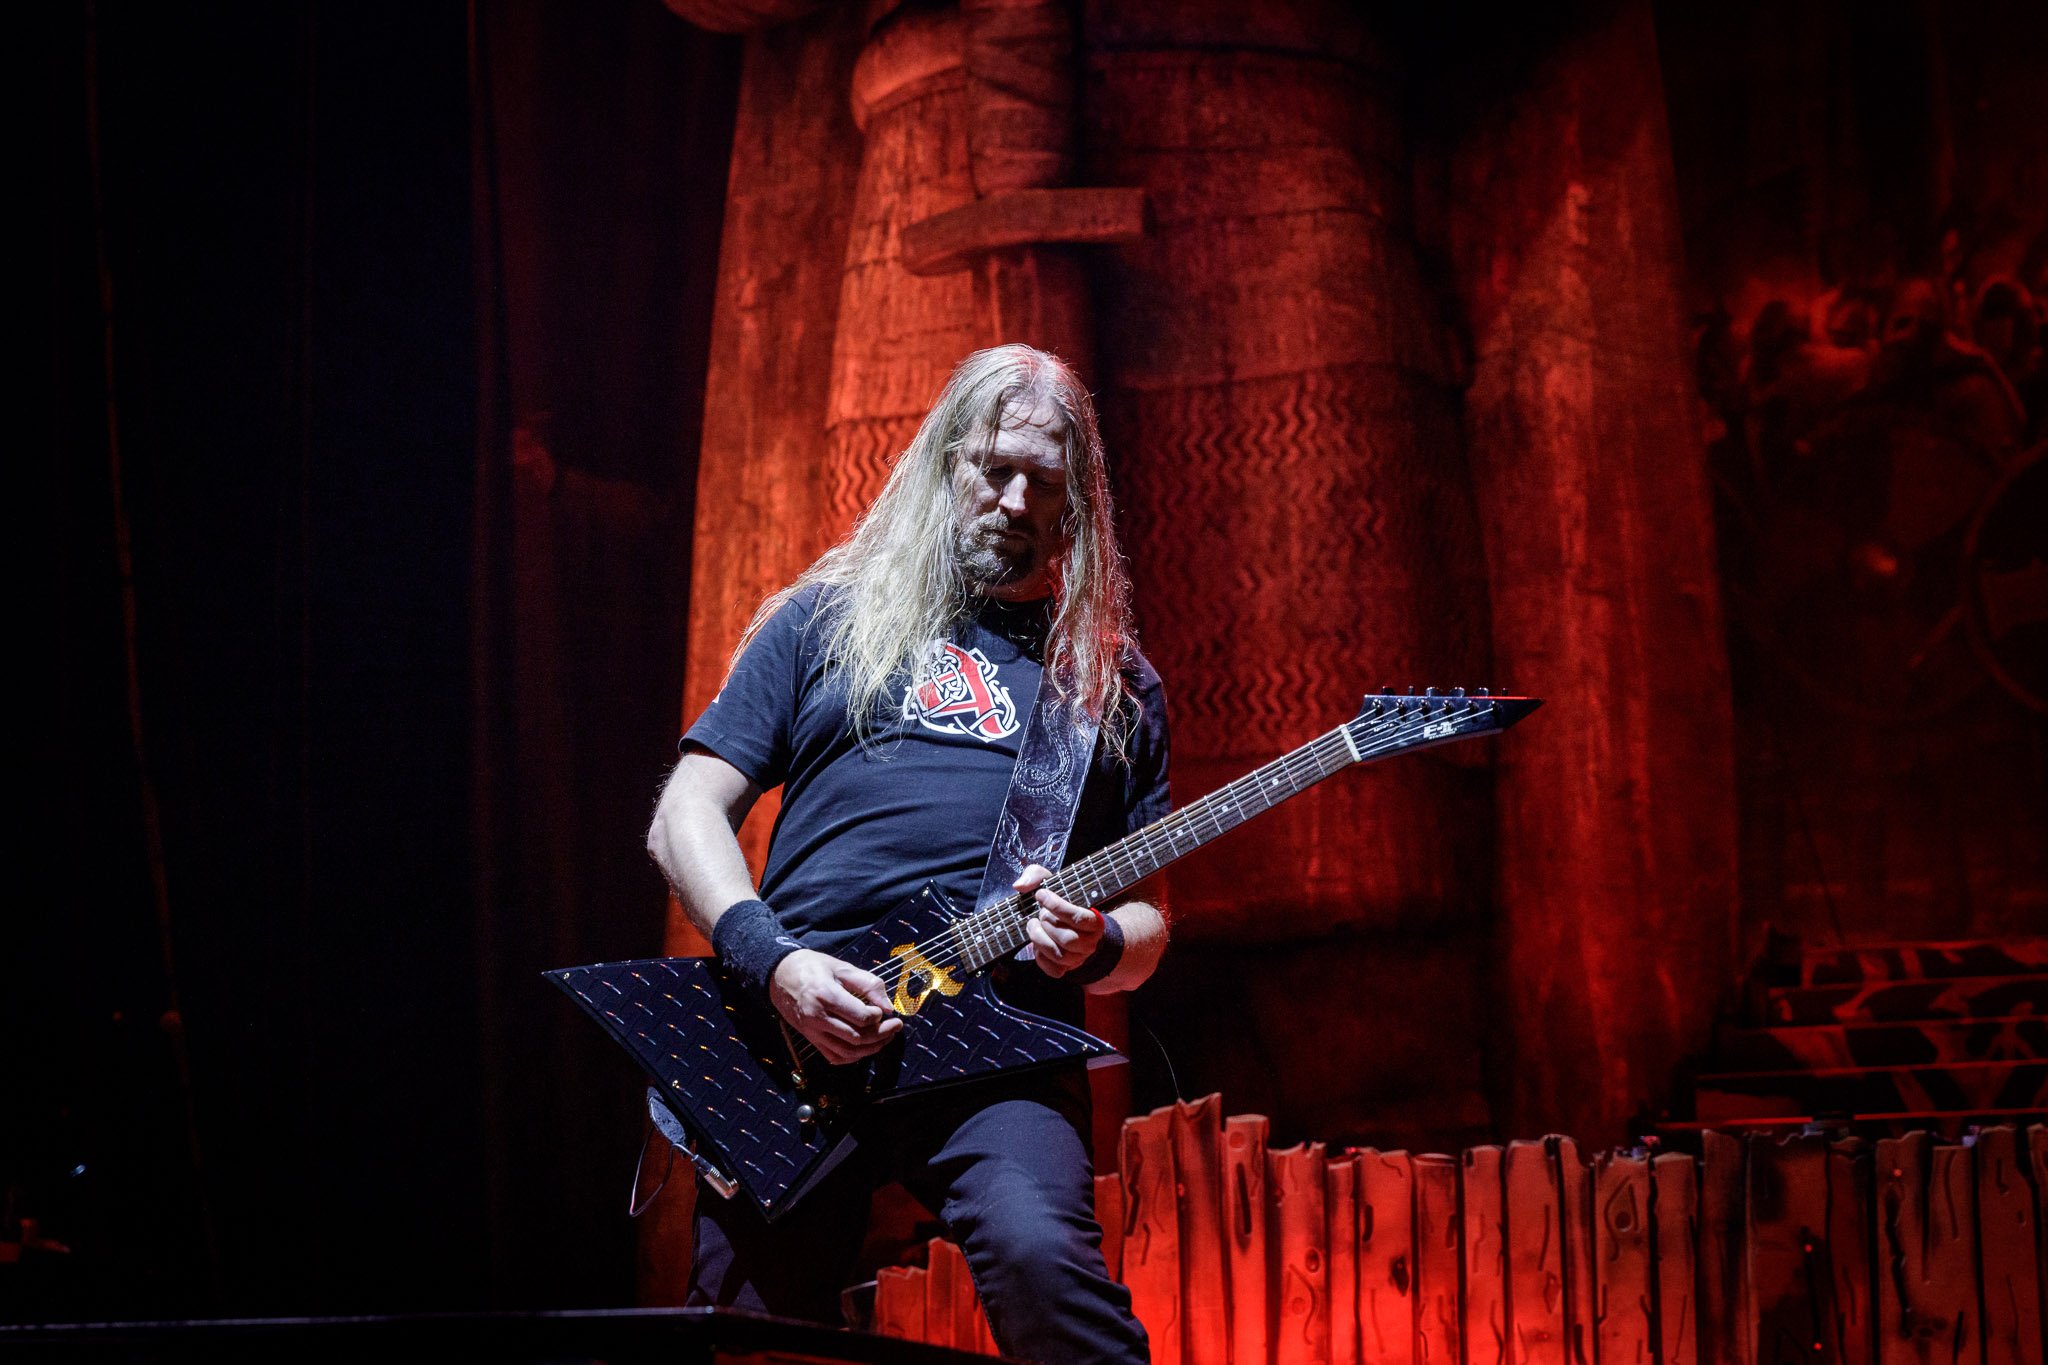 Amon Amarth at the AO Arena in Manchester on September 12th 2022